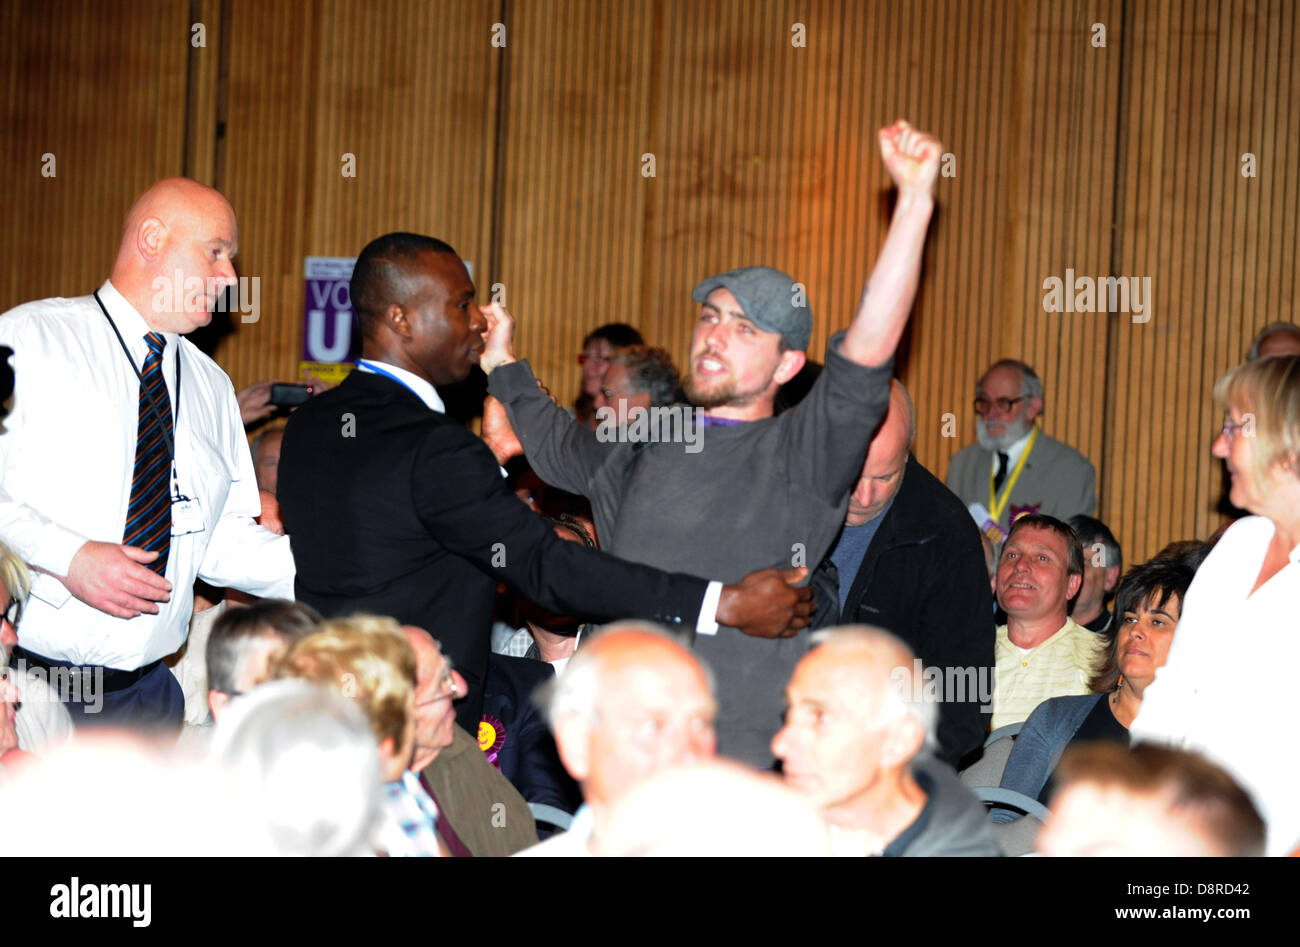 Hove, UK. 3rd June 2013. Protesters try to disrupt a meeting with UKIP leader Nigel Farage at Hove town hall tonight Stock Photo